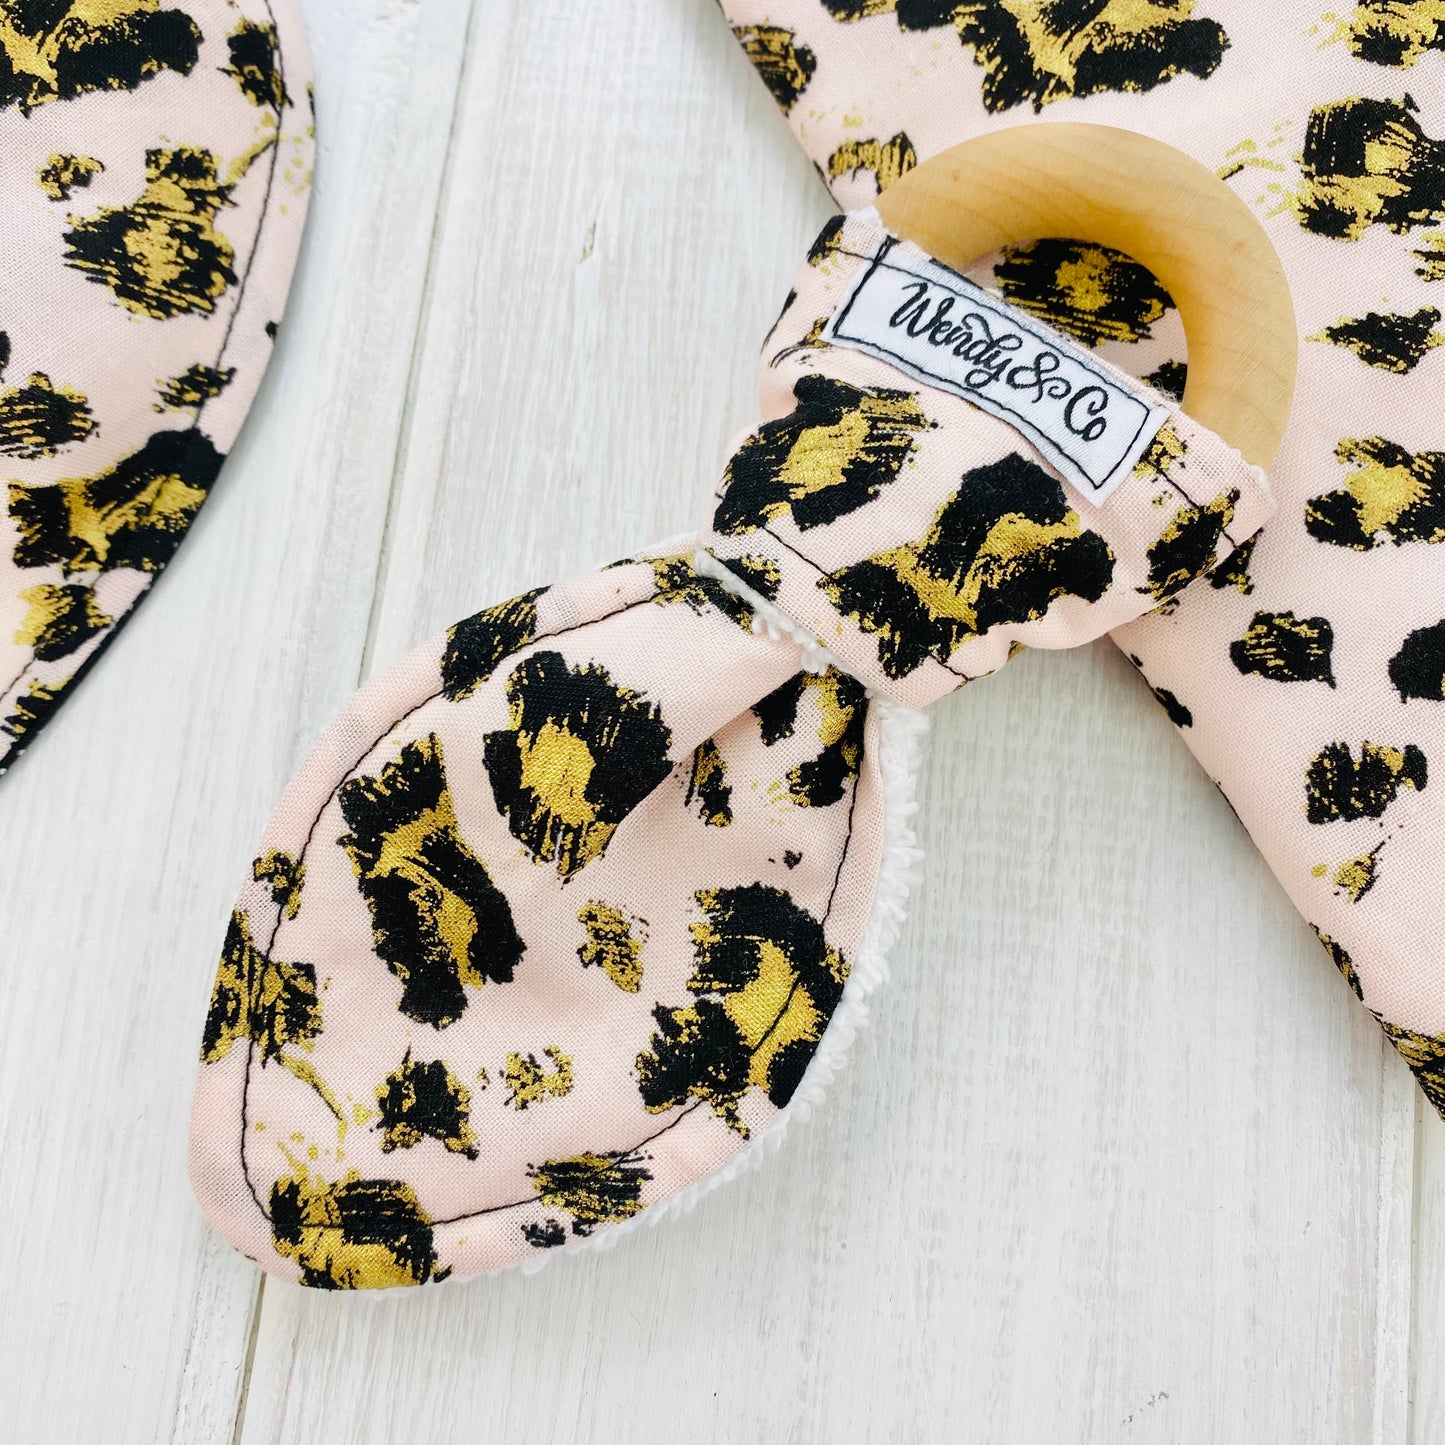 Blush pink cheetah animal print fabric with black and gold accents baby teether, handmade, maple wood.